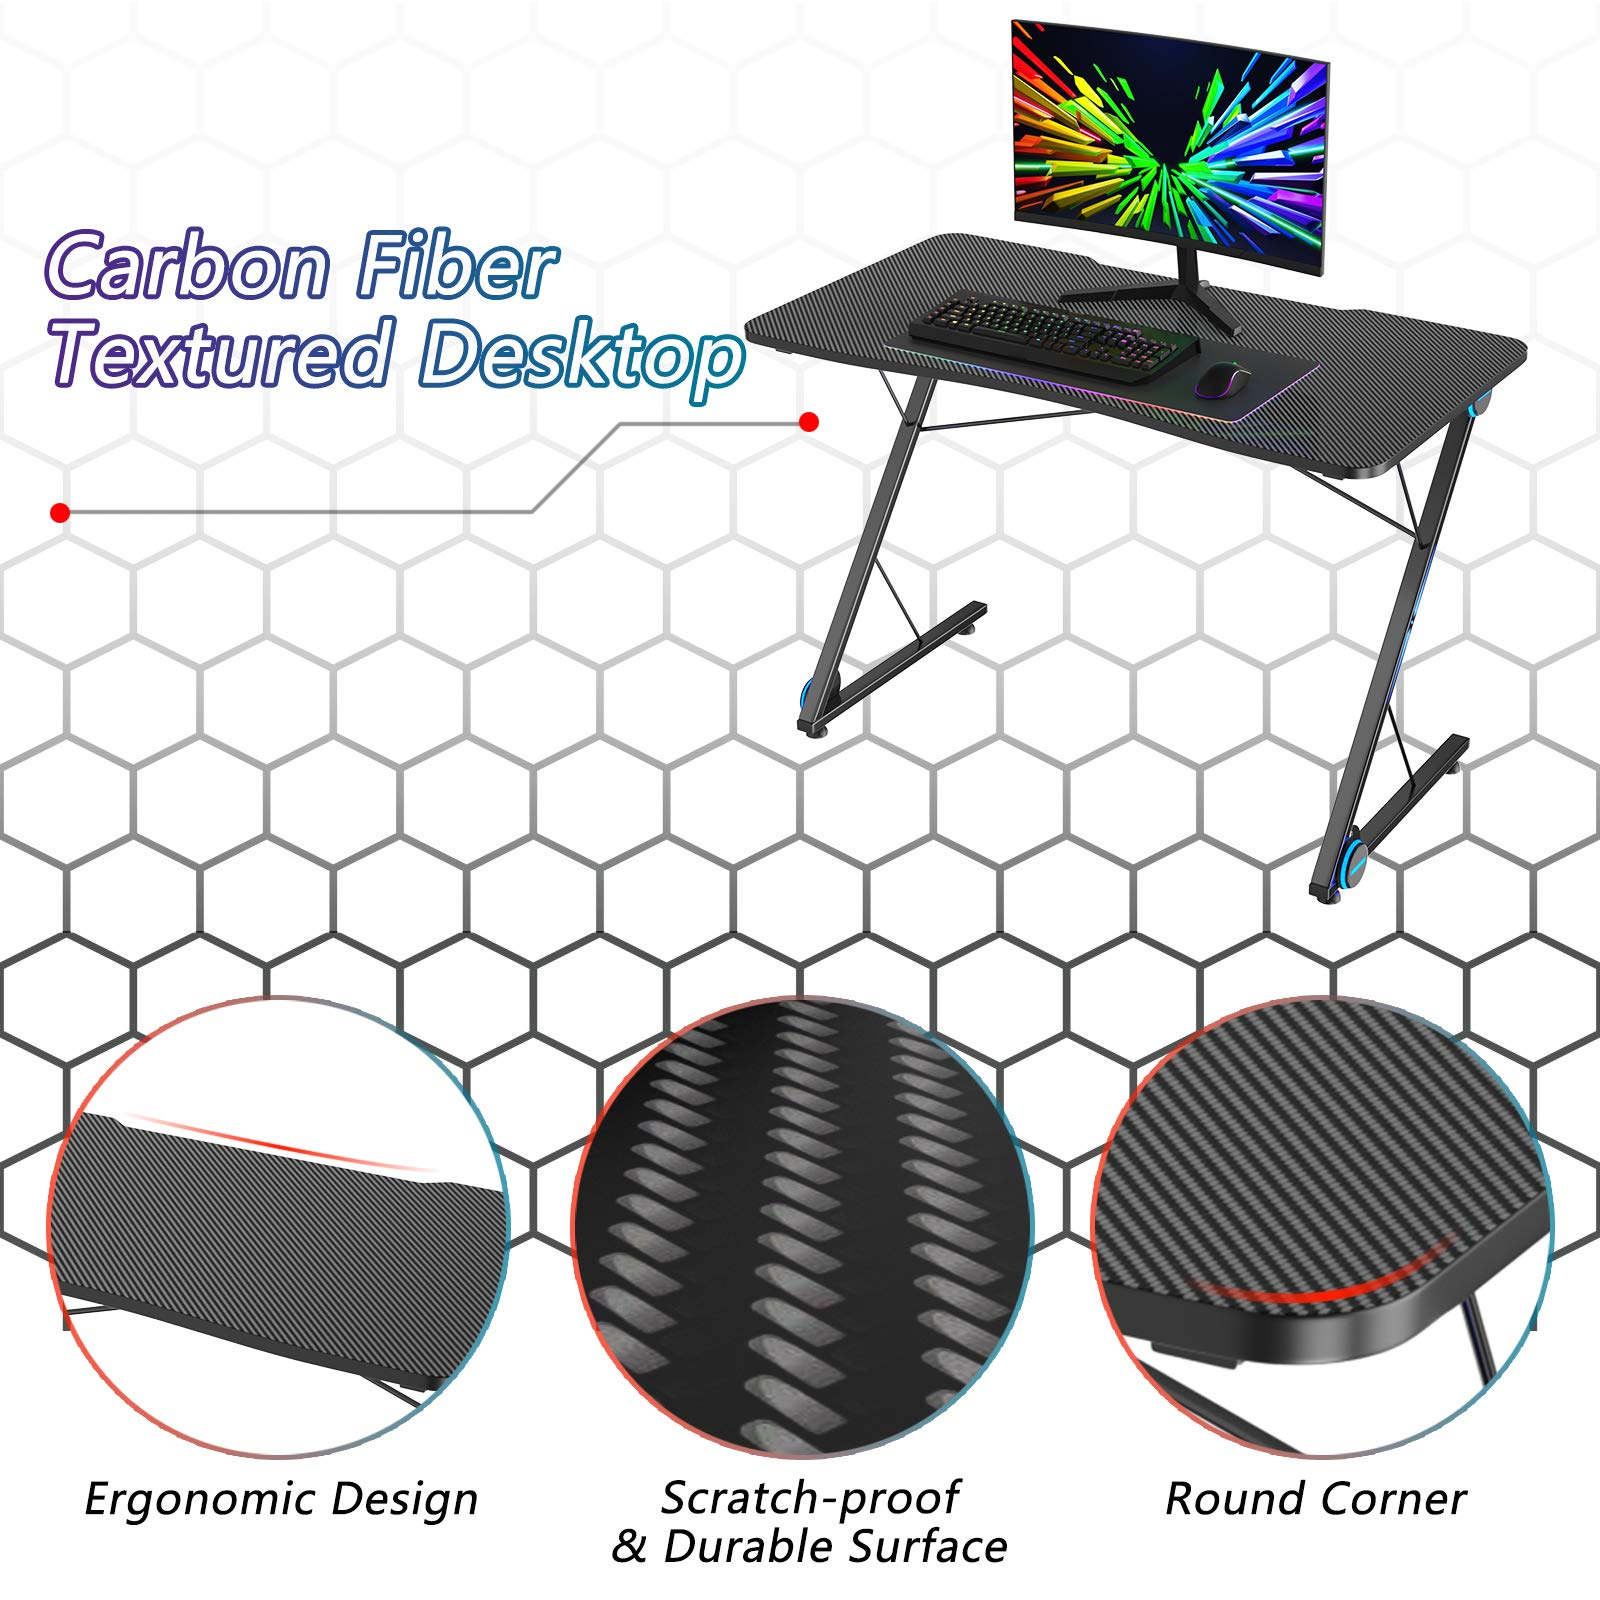 Tangkula Gaming Computer Desk, Z-Shaped Home Office Computer Table with LED Lights & Large Carbon Fiber Surface